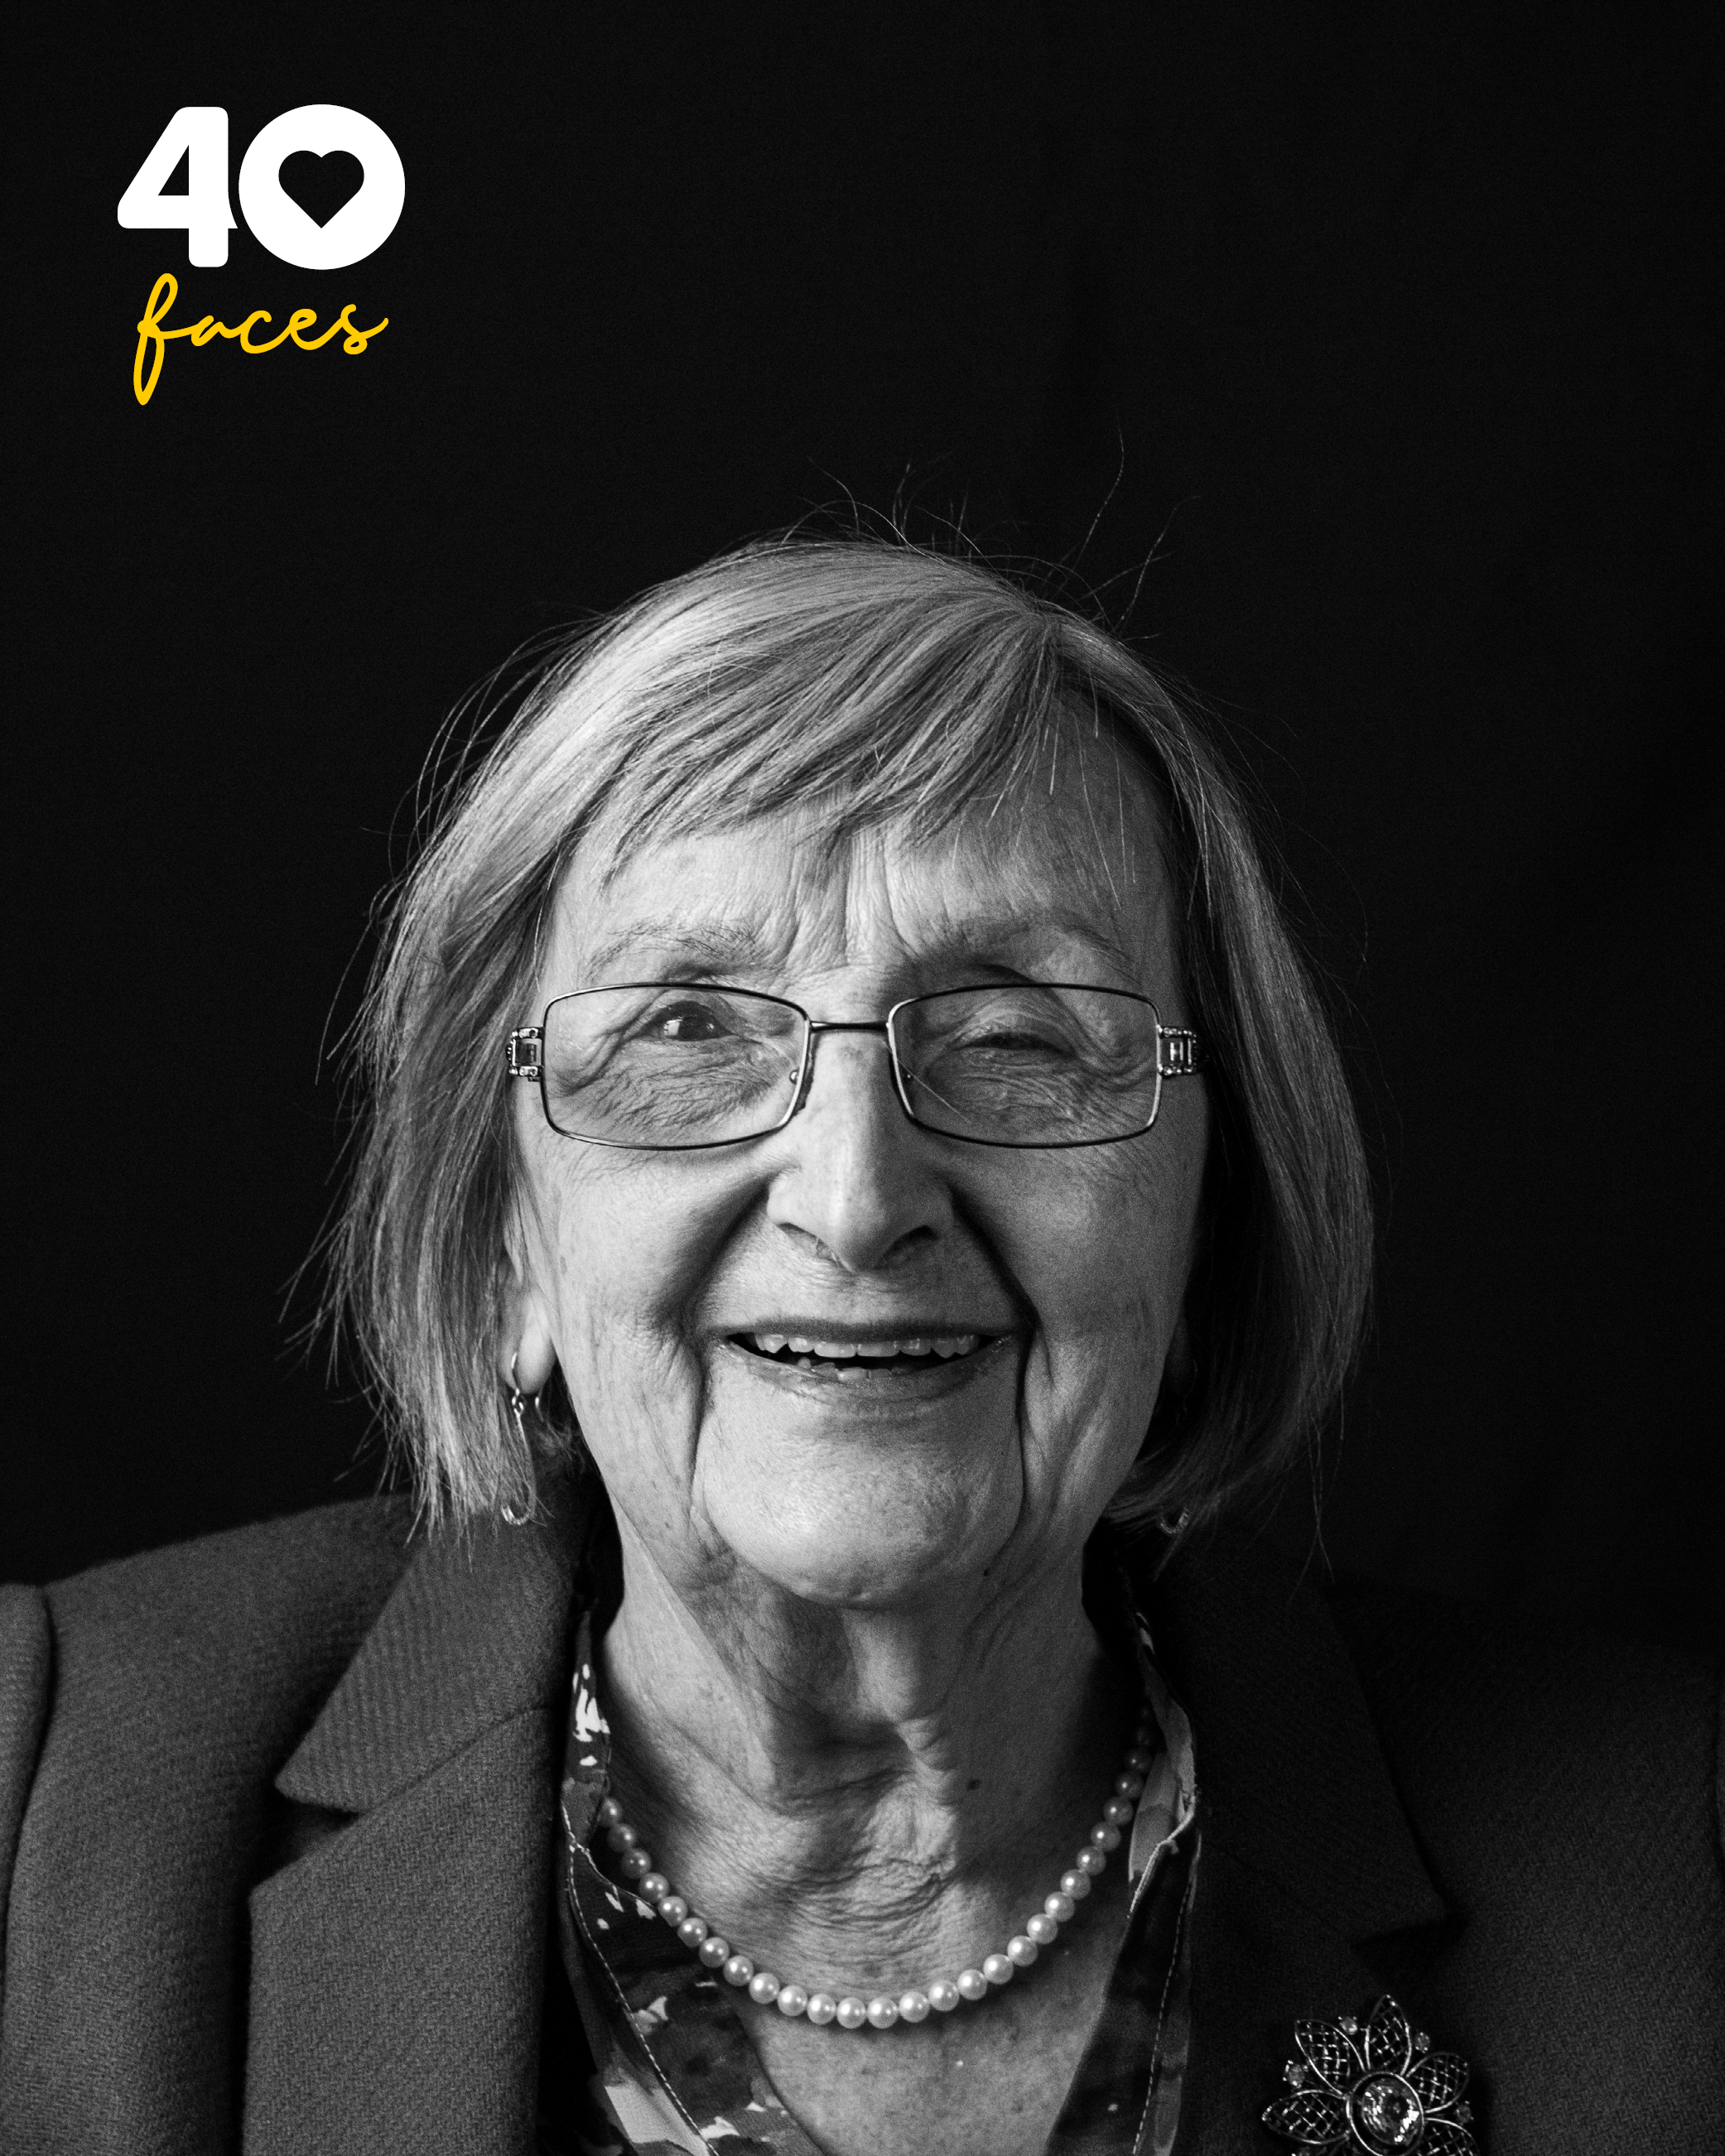 A lady, Sheila Briggs, who is one of the founders of St Barnabas Hospice, photographed in black and white, against a black backdrop